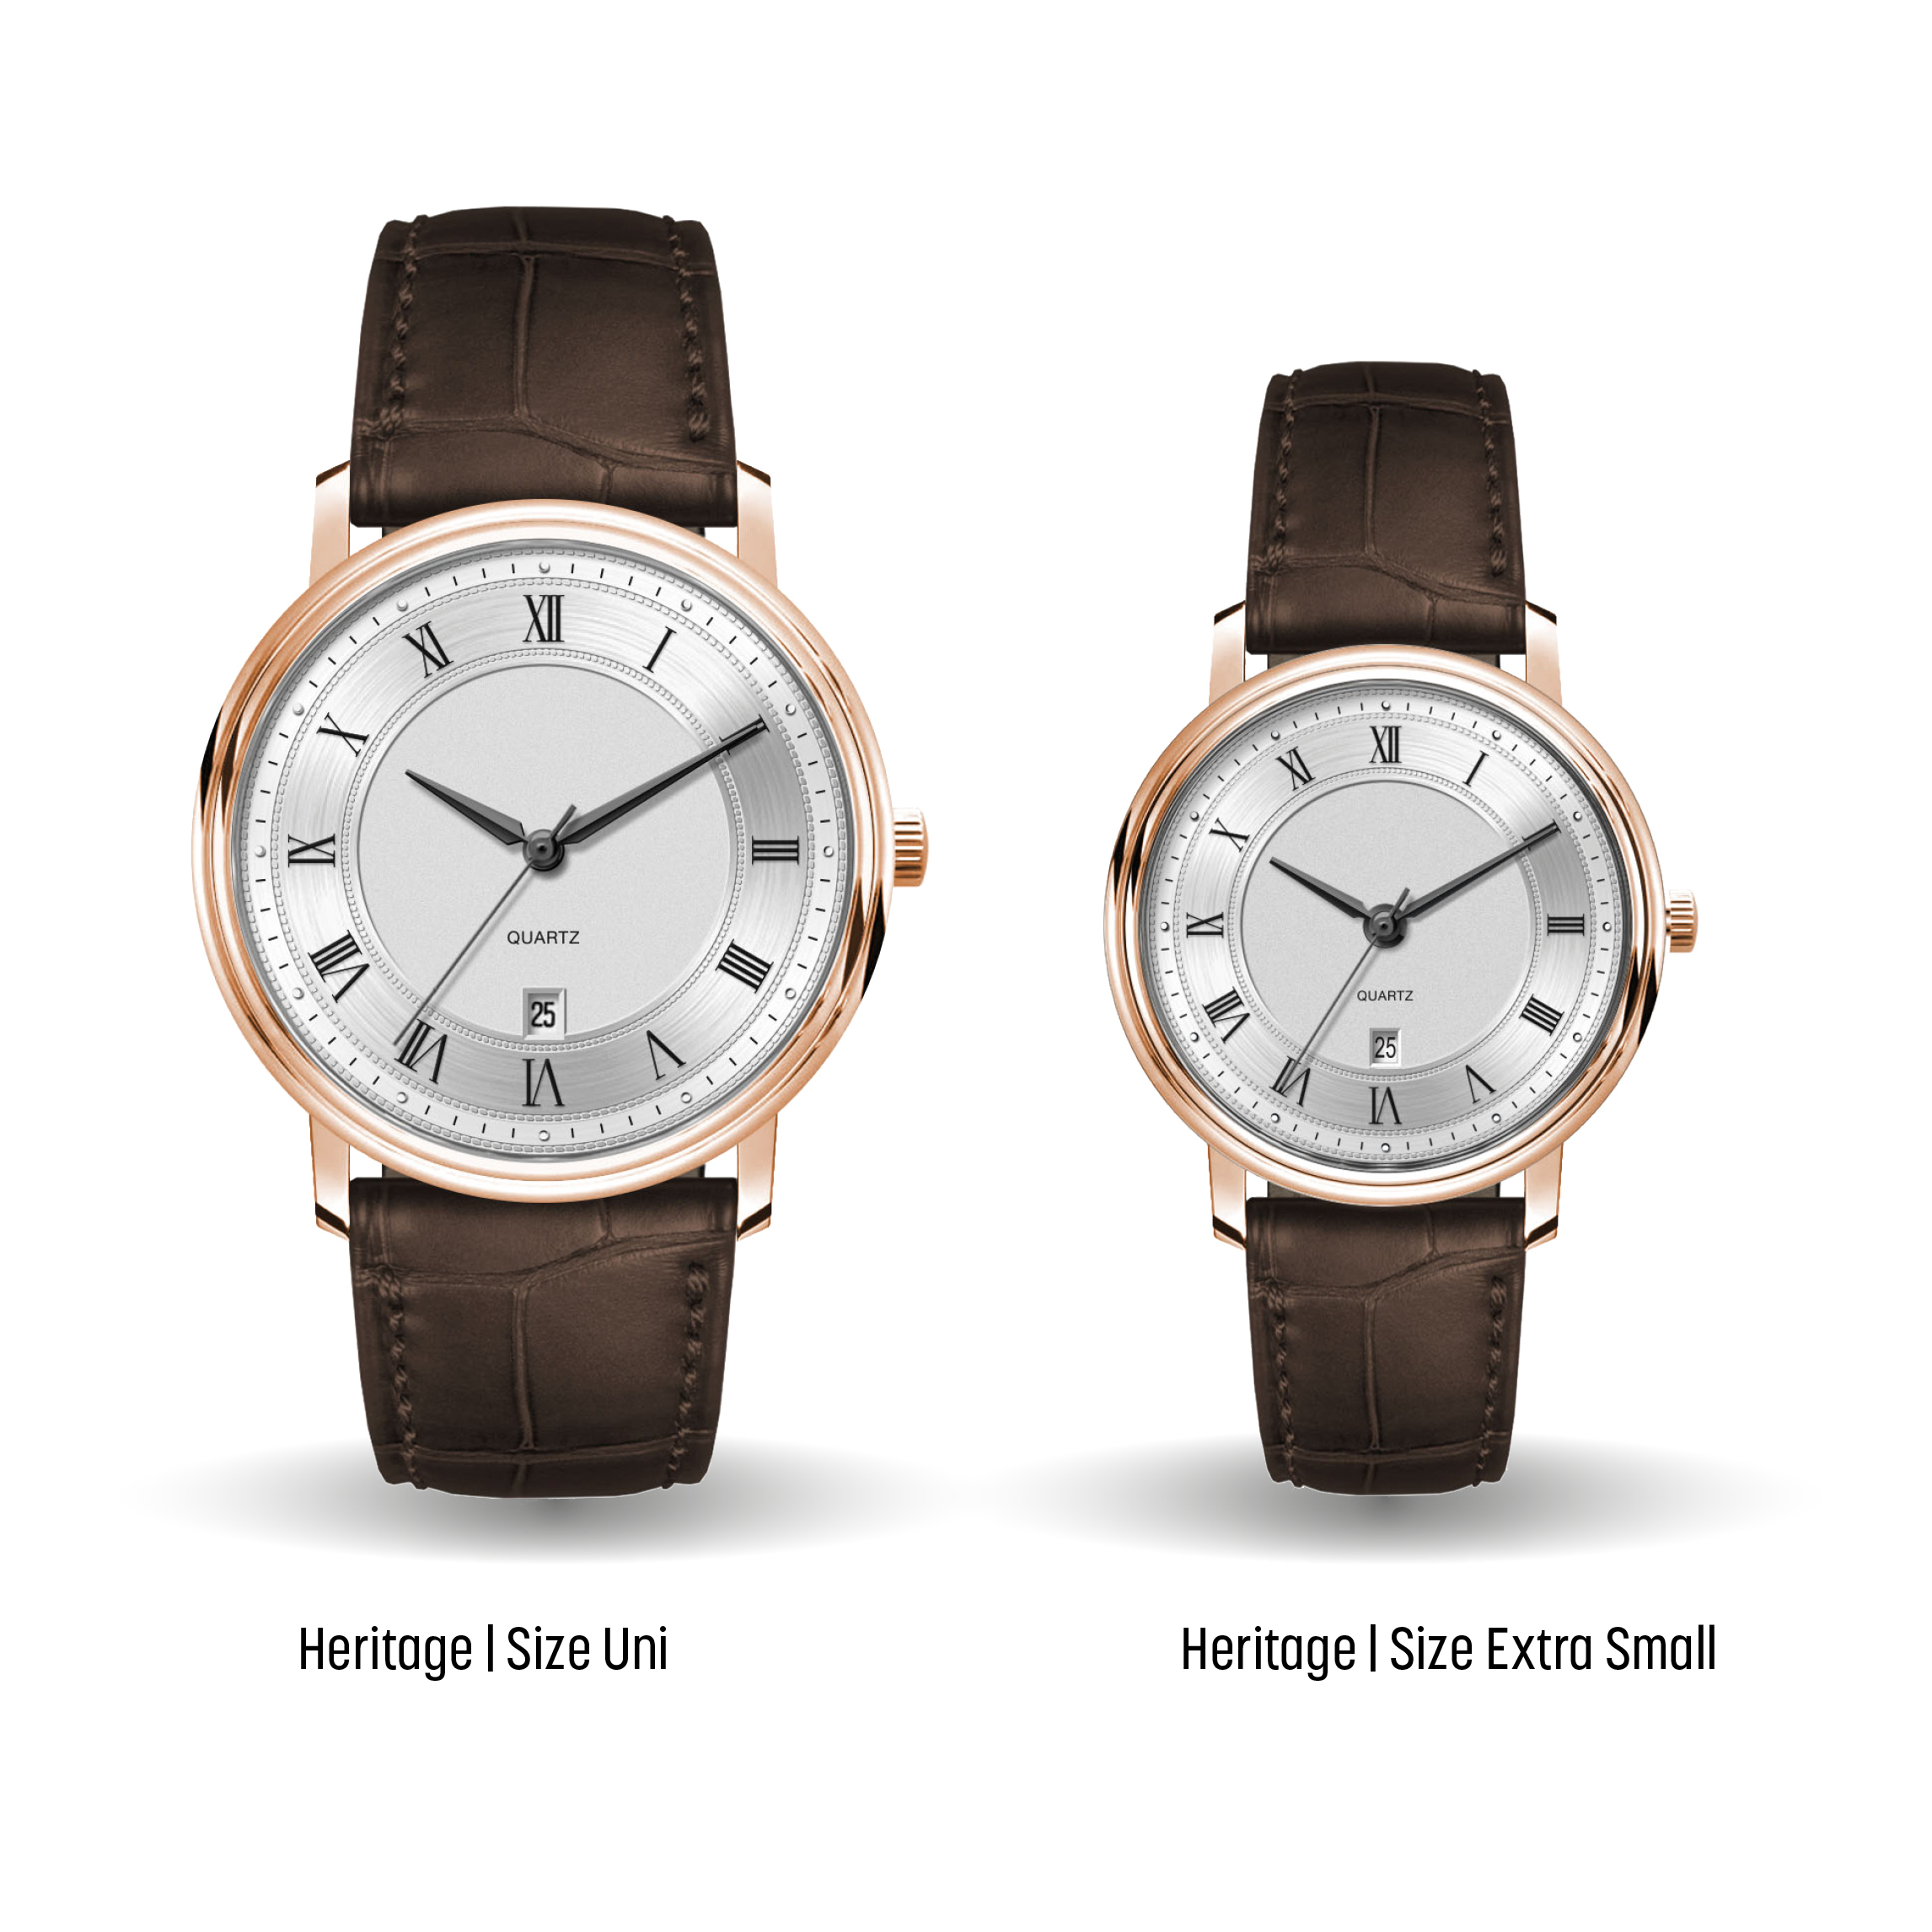 Bespoke CLASSIC quartz watches by Watch Branding - perfect for corporate gifts and corporate anniversaries.